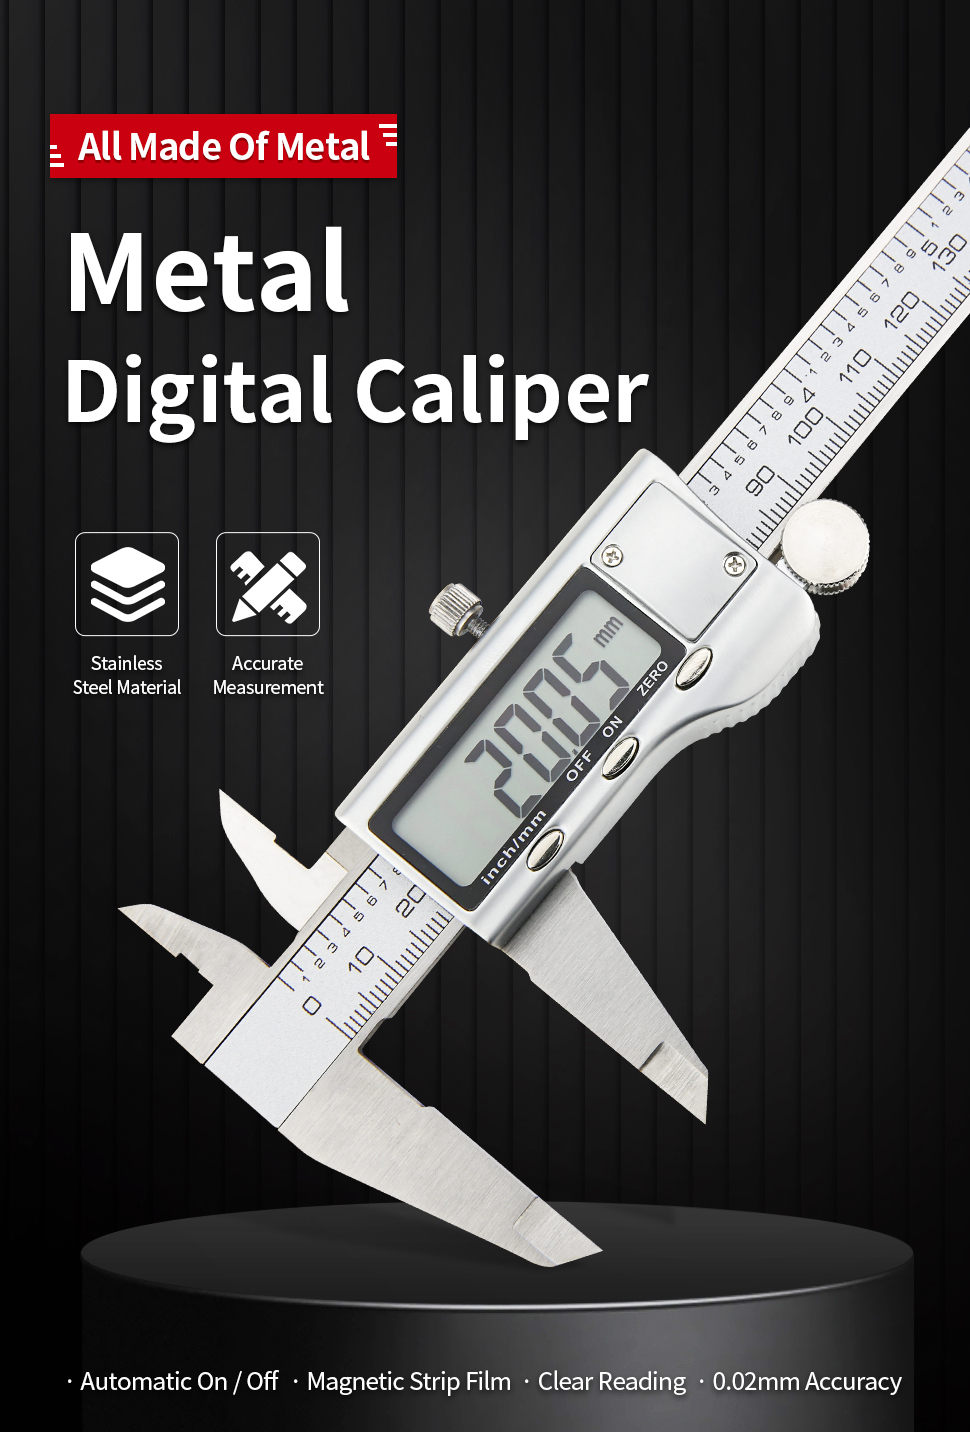 Stainless-Steel-Digital-metal-Fraction-Caliper-150mm-mm-Inch-High-Precision-large-LCD-display-Vernie-1524240-1